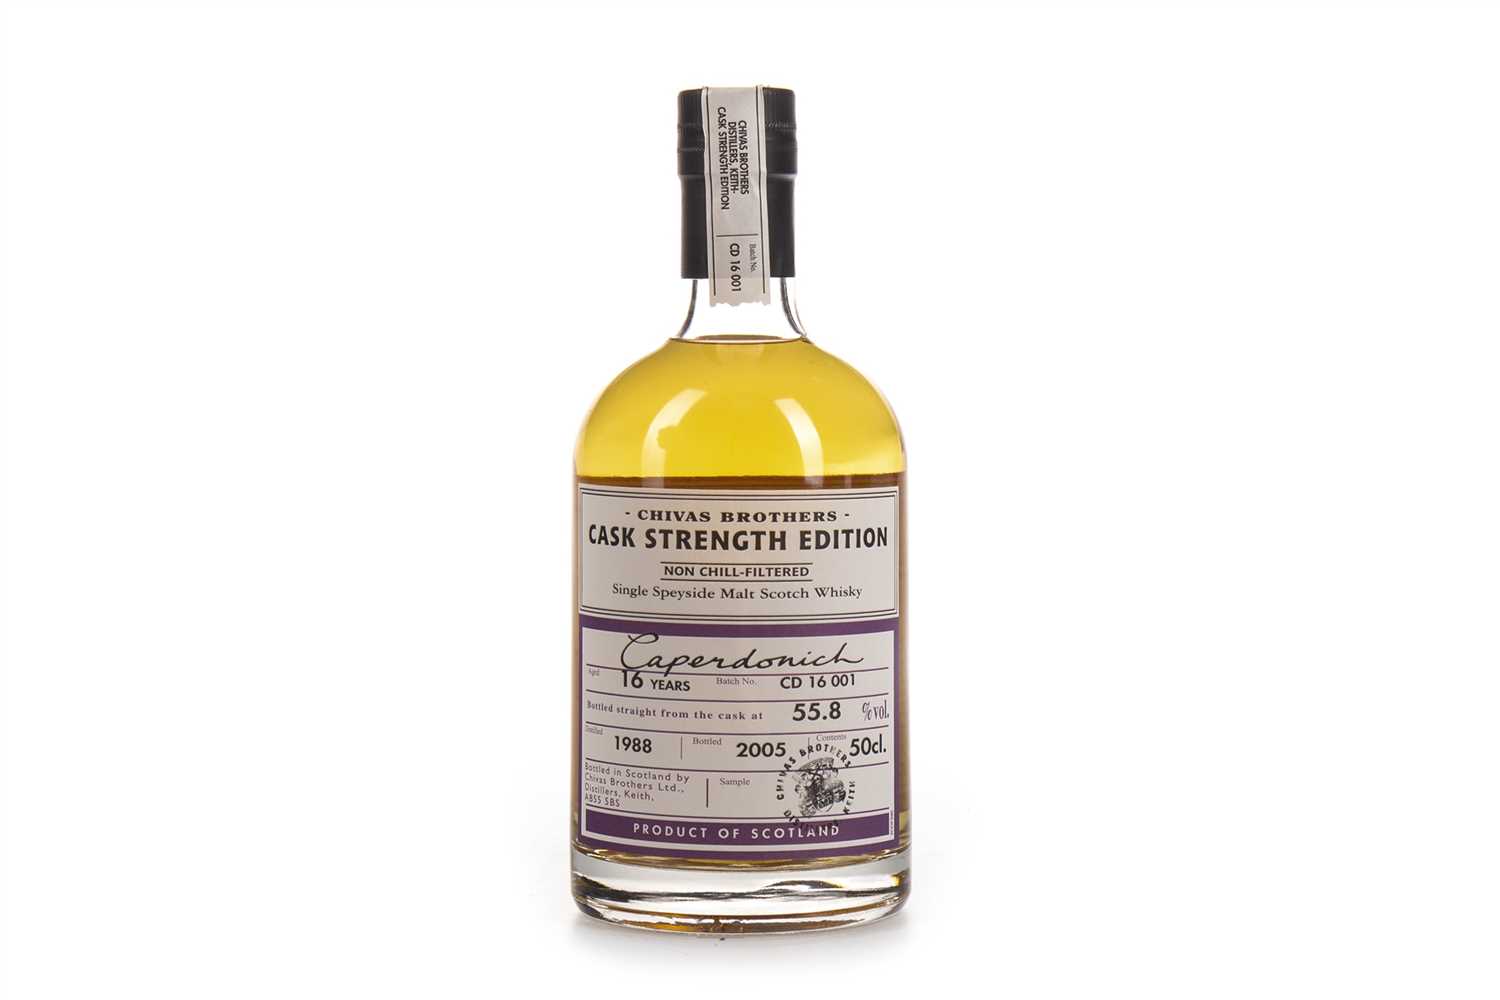 Lot 116 - CAPERDONICH 1988 CHIVAS BROTHERS CASK STRENGTH EDITION AGED 16 YEARS